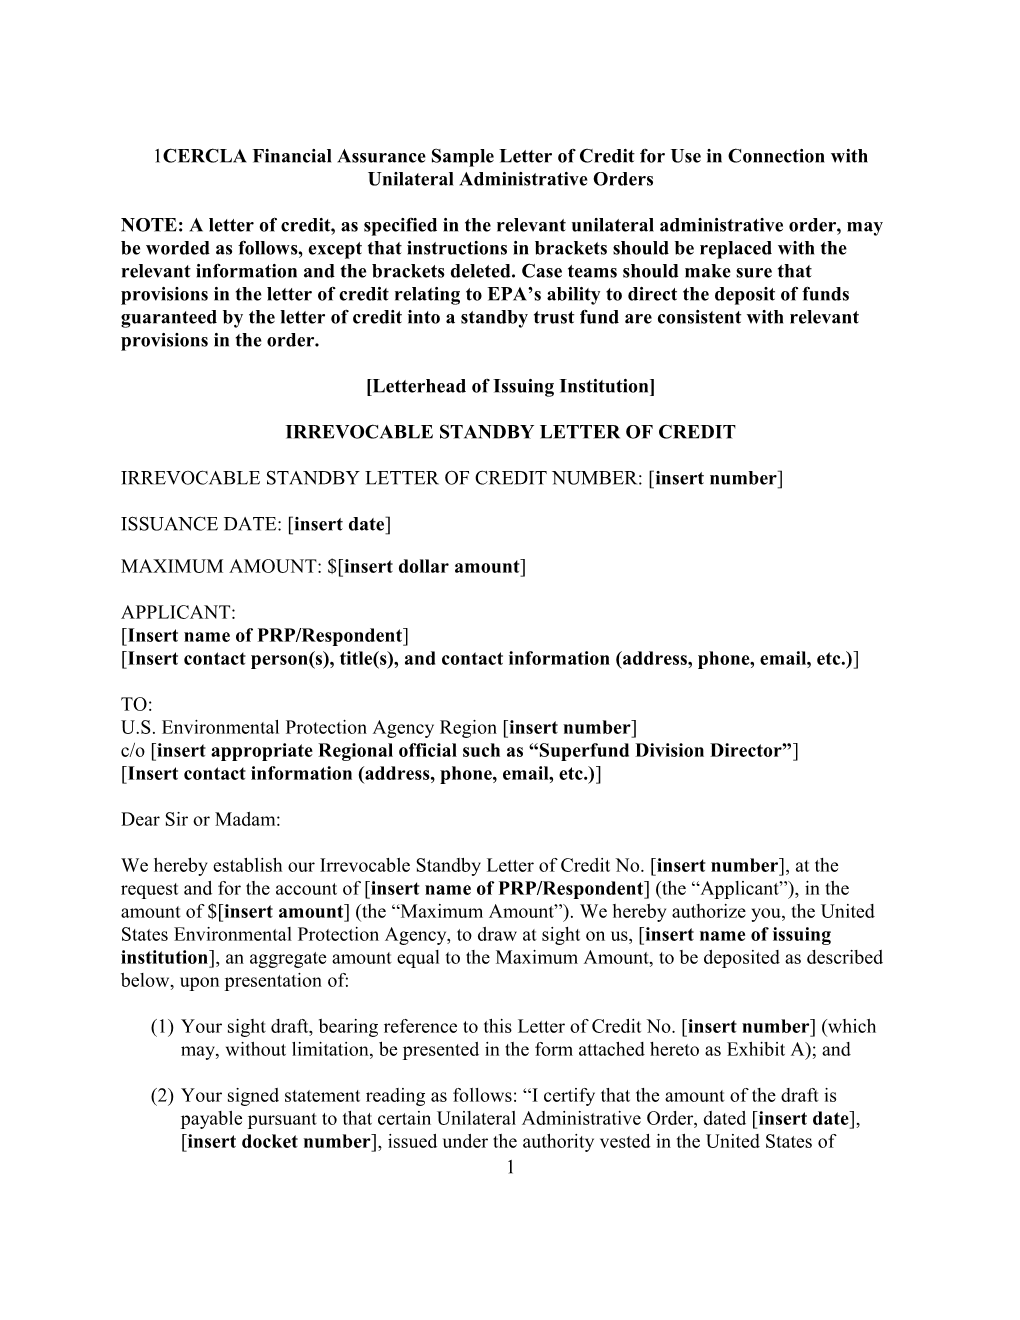 CERCLA Financial Assurance Sample Letter of Credit for Use in Connection with Unilateral